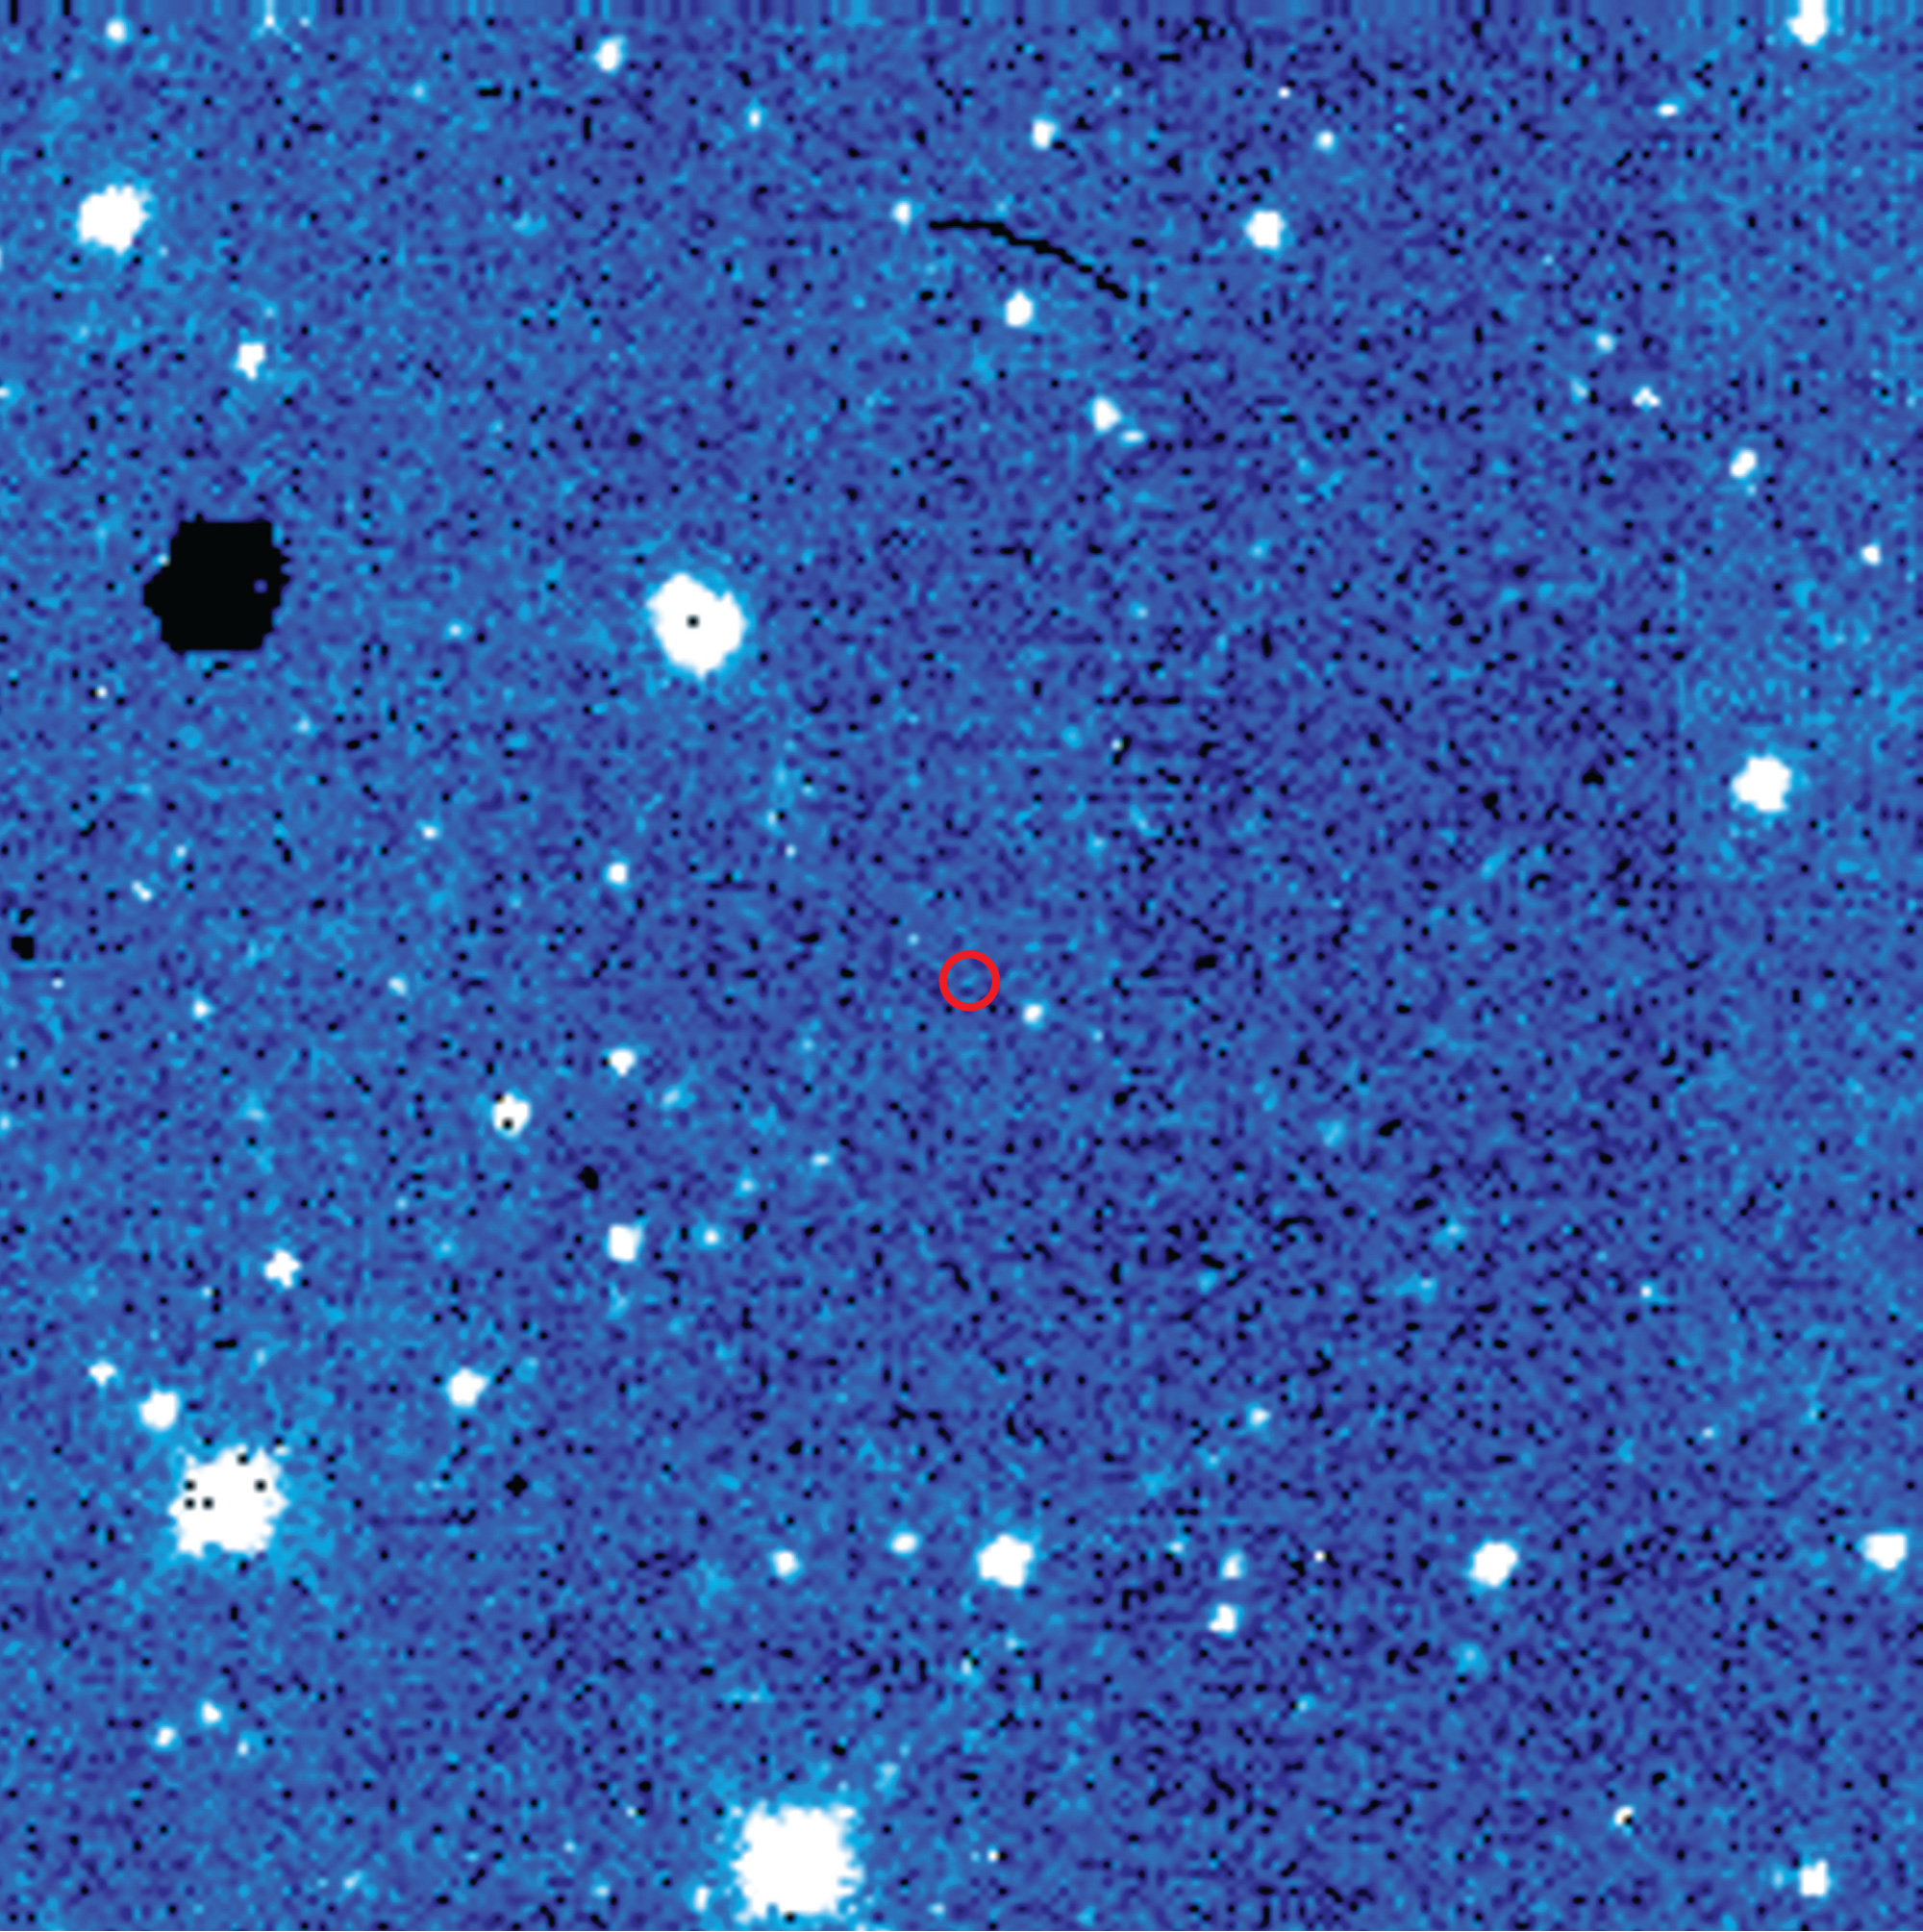 An infrared image of an asteroid belt taken on the 14th of January two thousand and ten, with “13585 Justinsmith” identified by a red circle. 